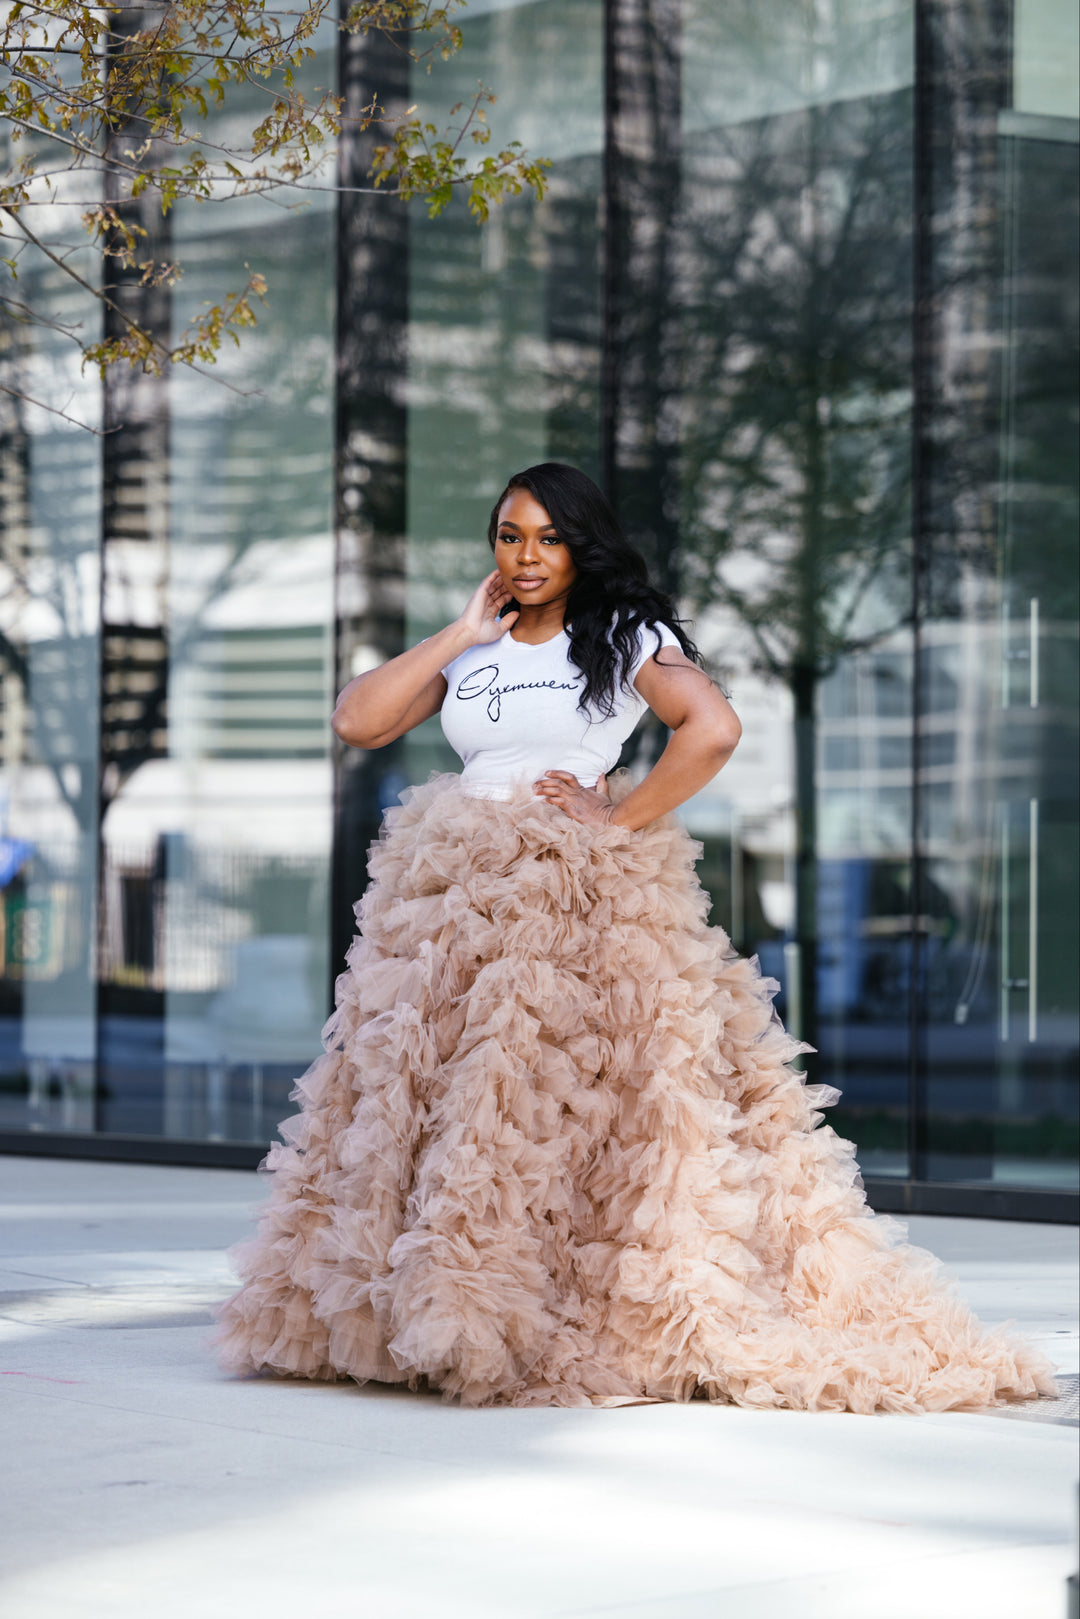 Oyemwen Business in front, Party in the back tulle tiered skirt